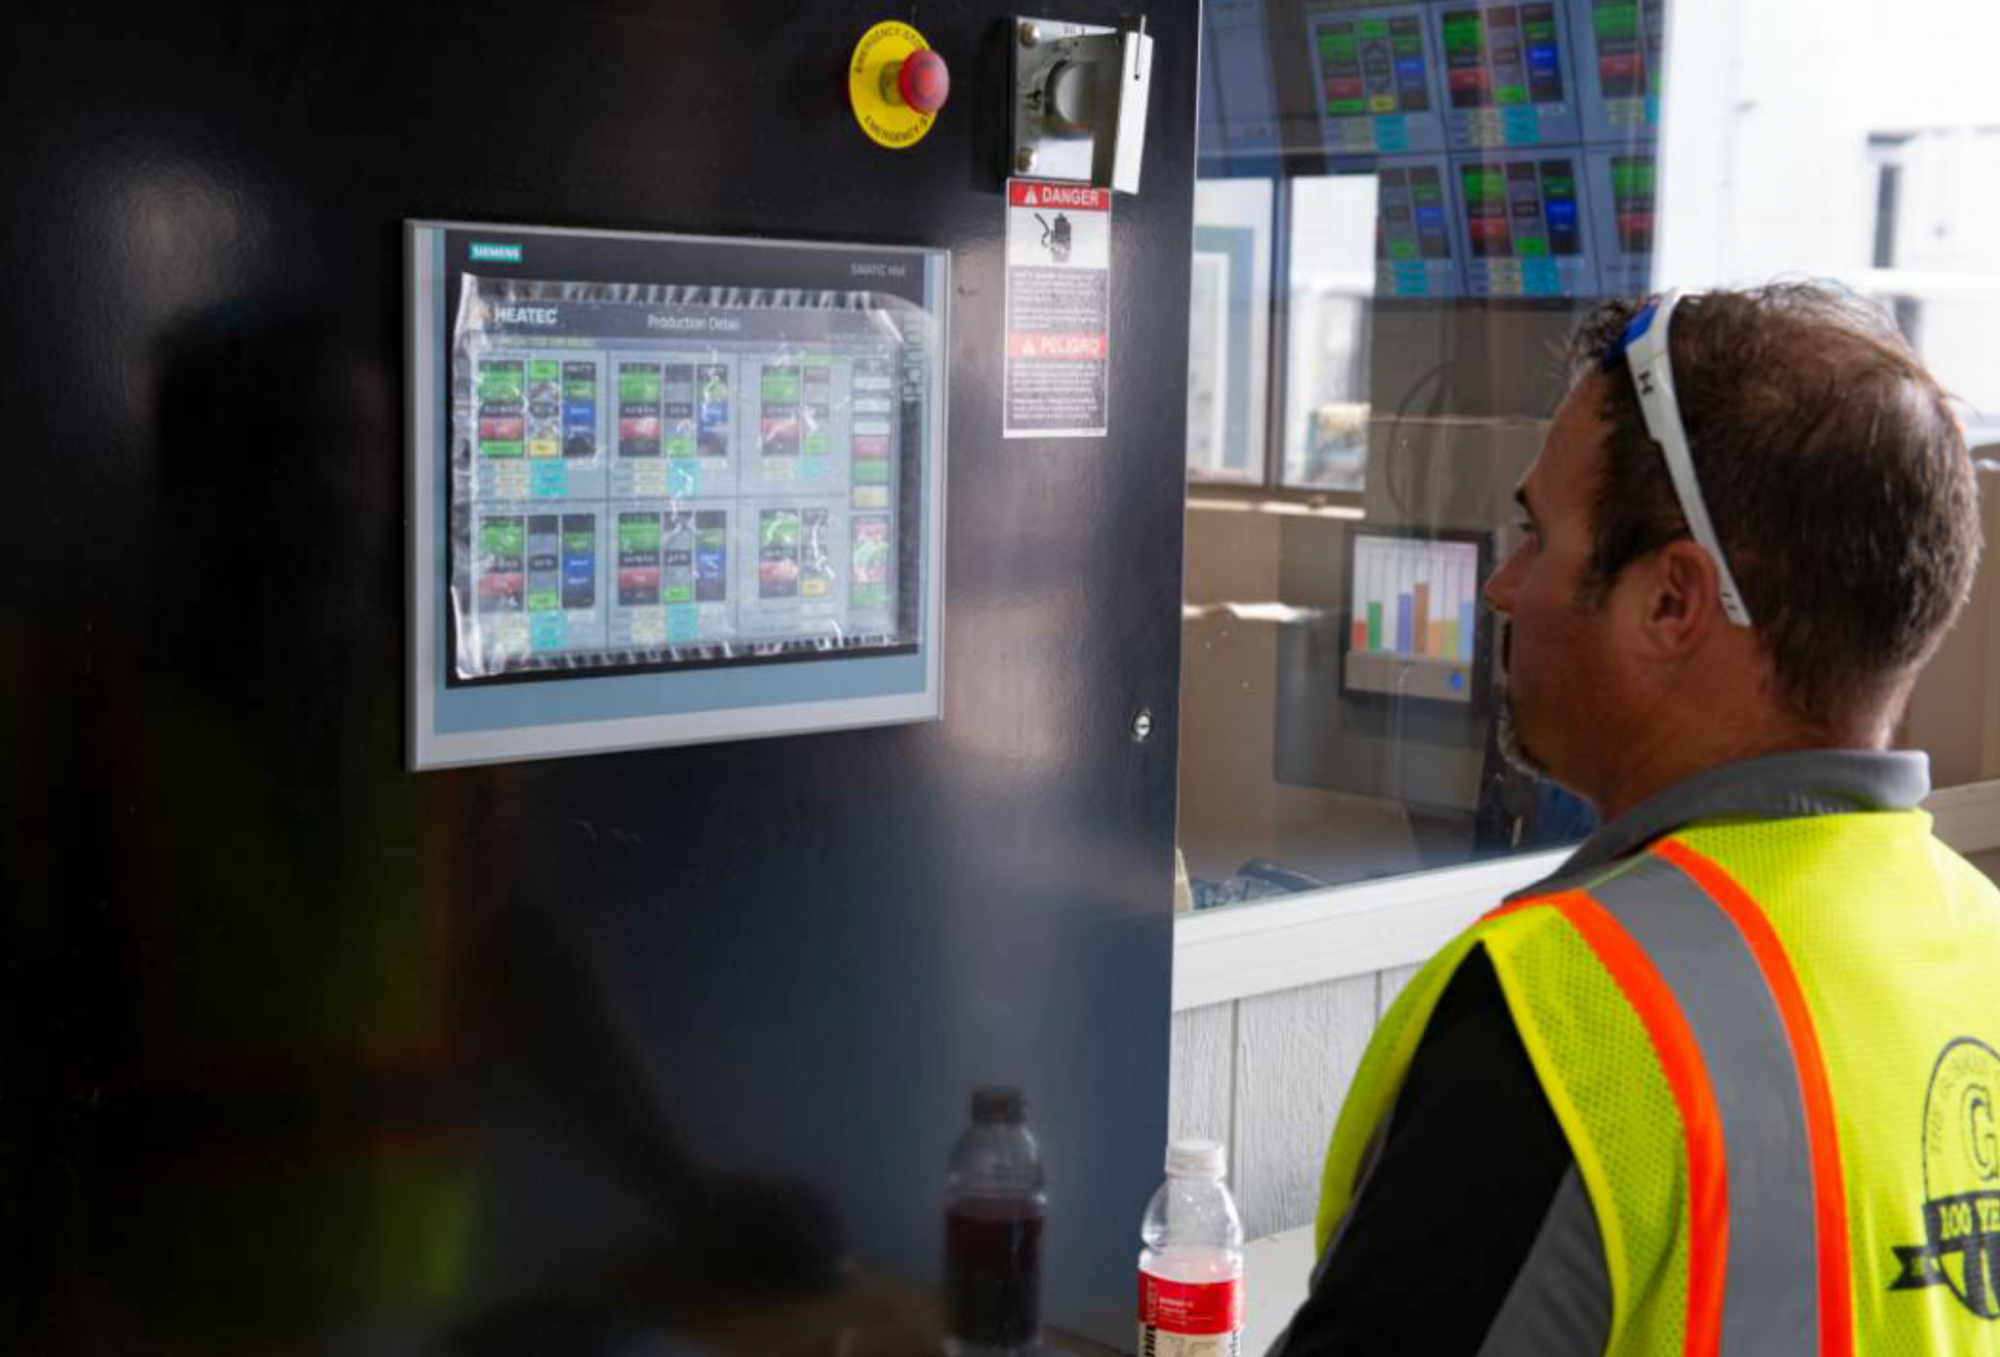 From the touch screen central controls for the mill system, workers can change recipes. The company makes close to 30 kinds of emulsion at the site. “So we’re constantly going back and forth and changing formulas and everything,” Brian Jones said.